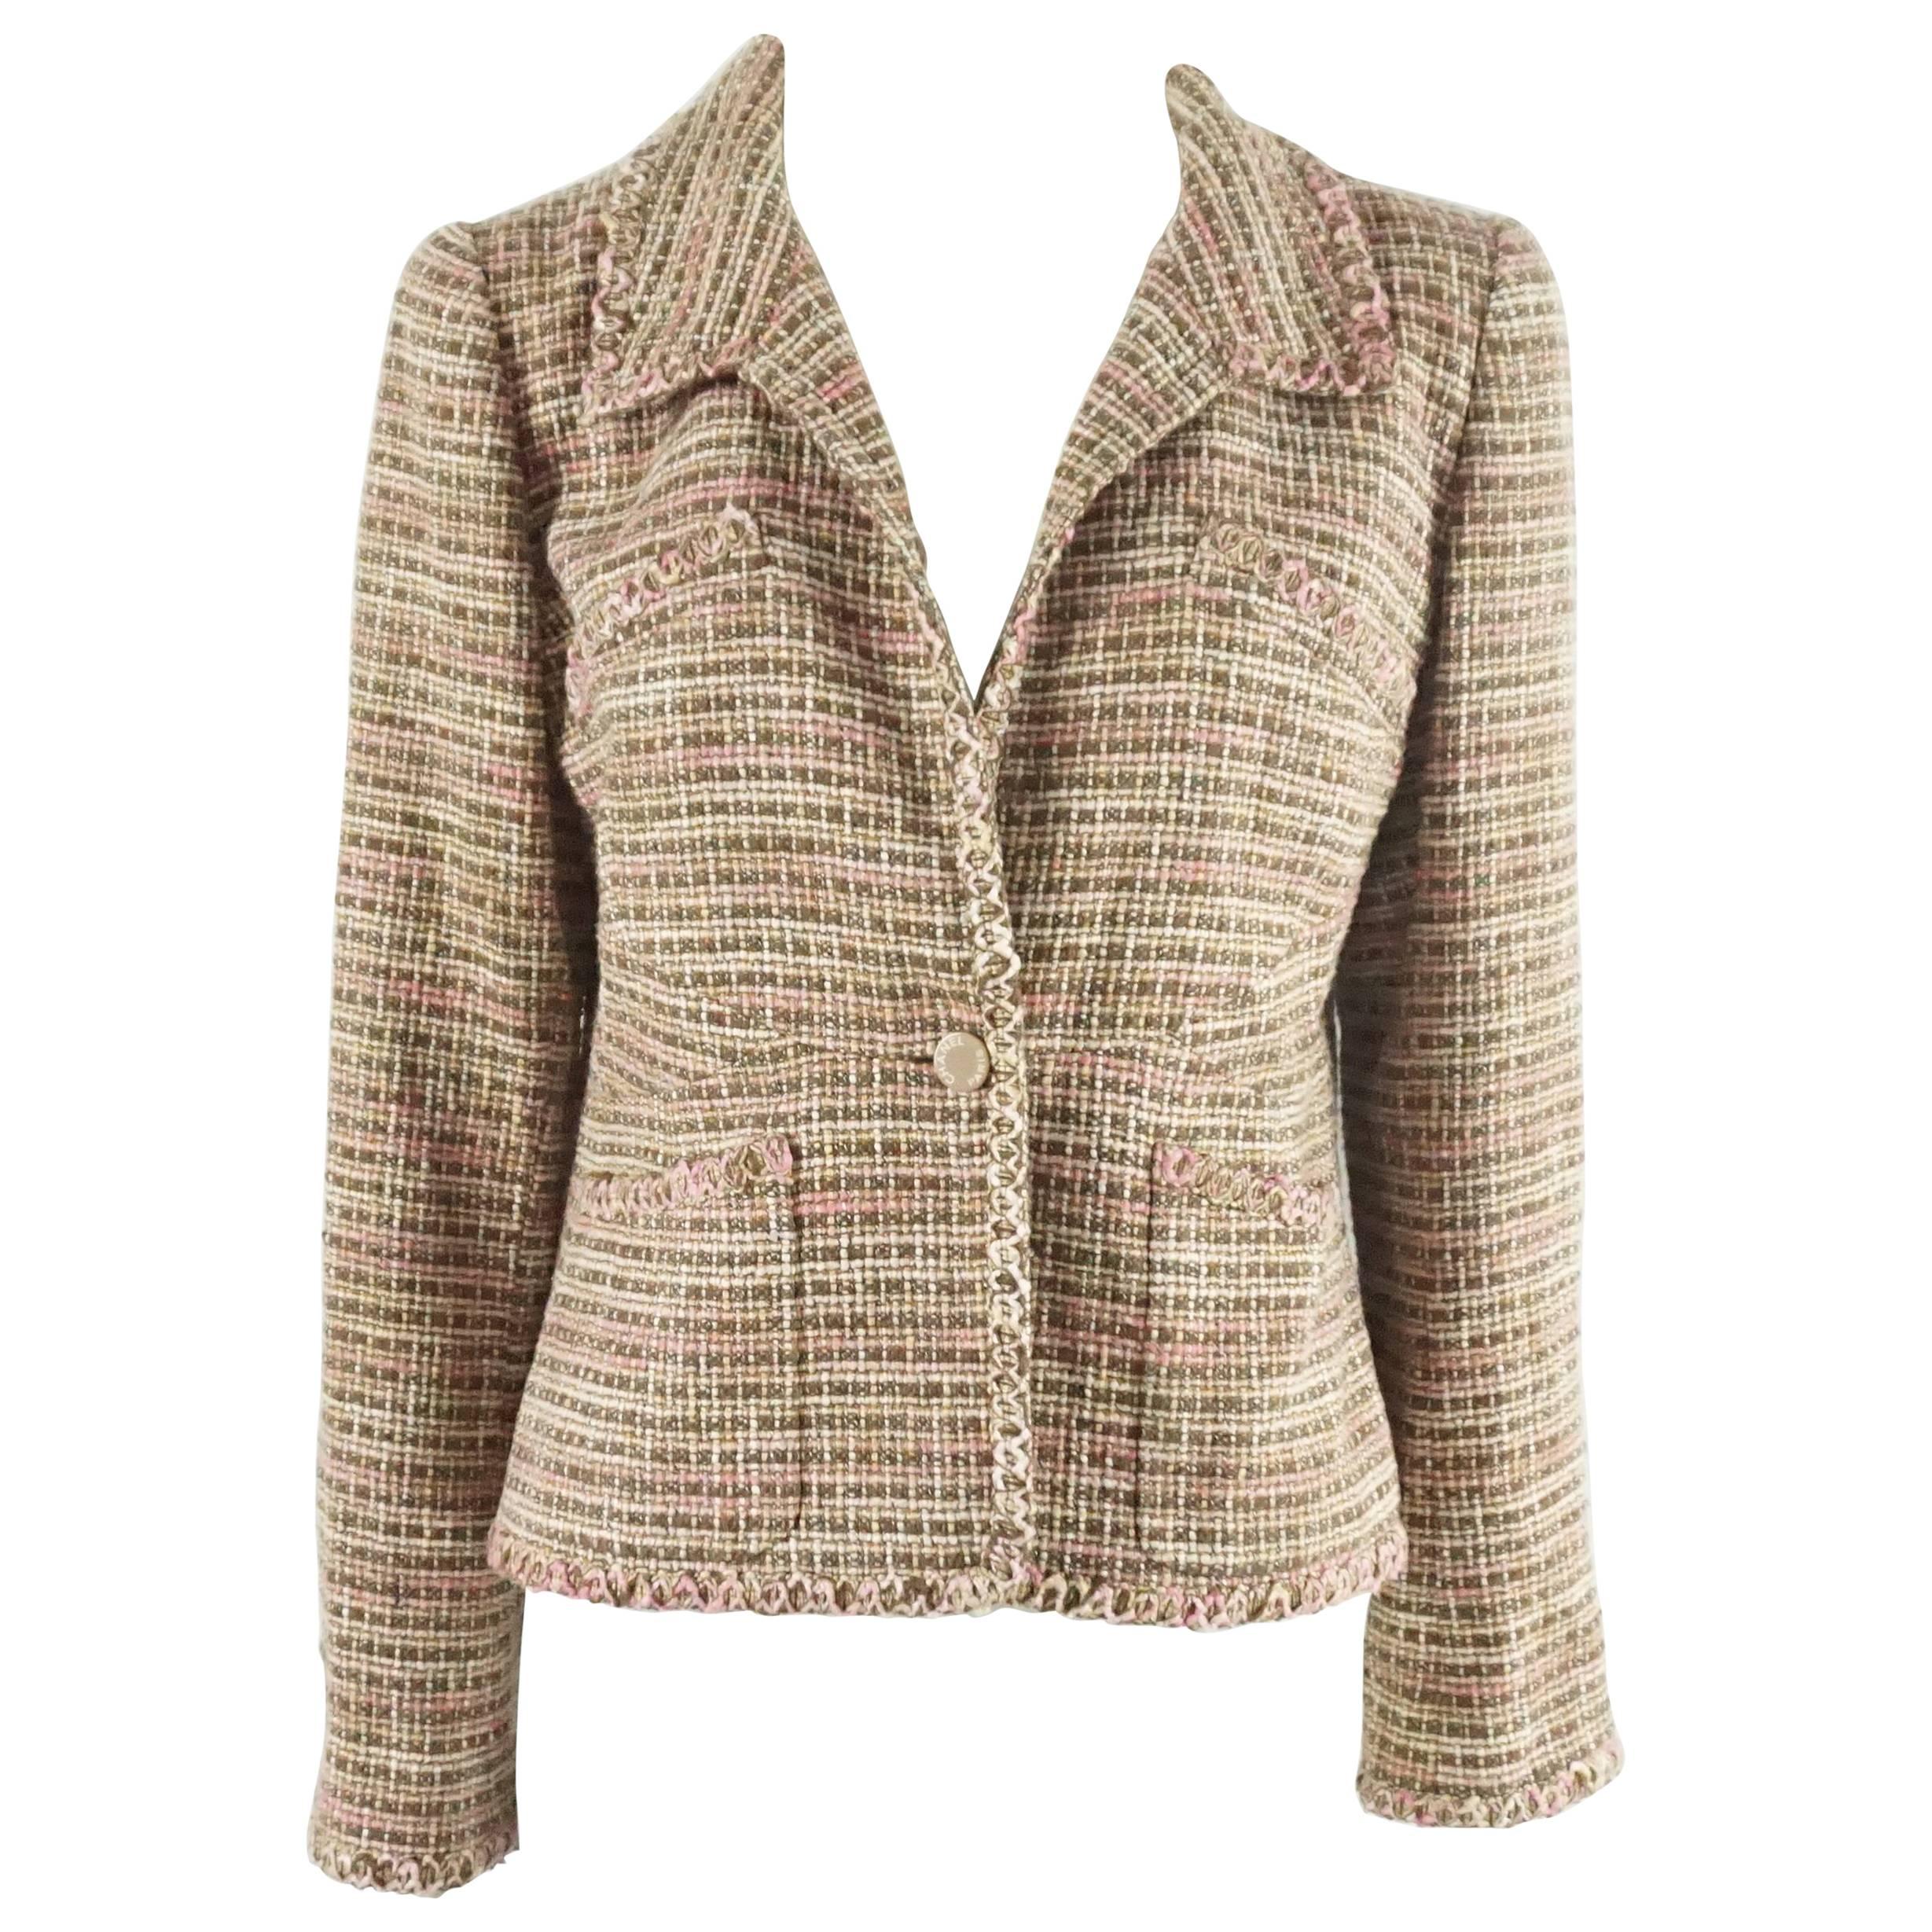 Chanel Brown and Pink Tweed Jacket with 4 Pockets - 42